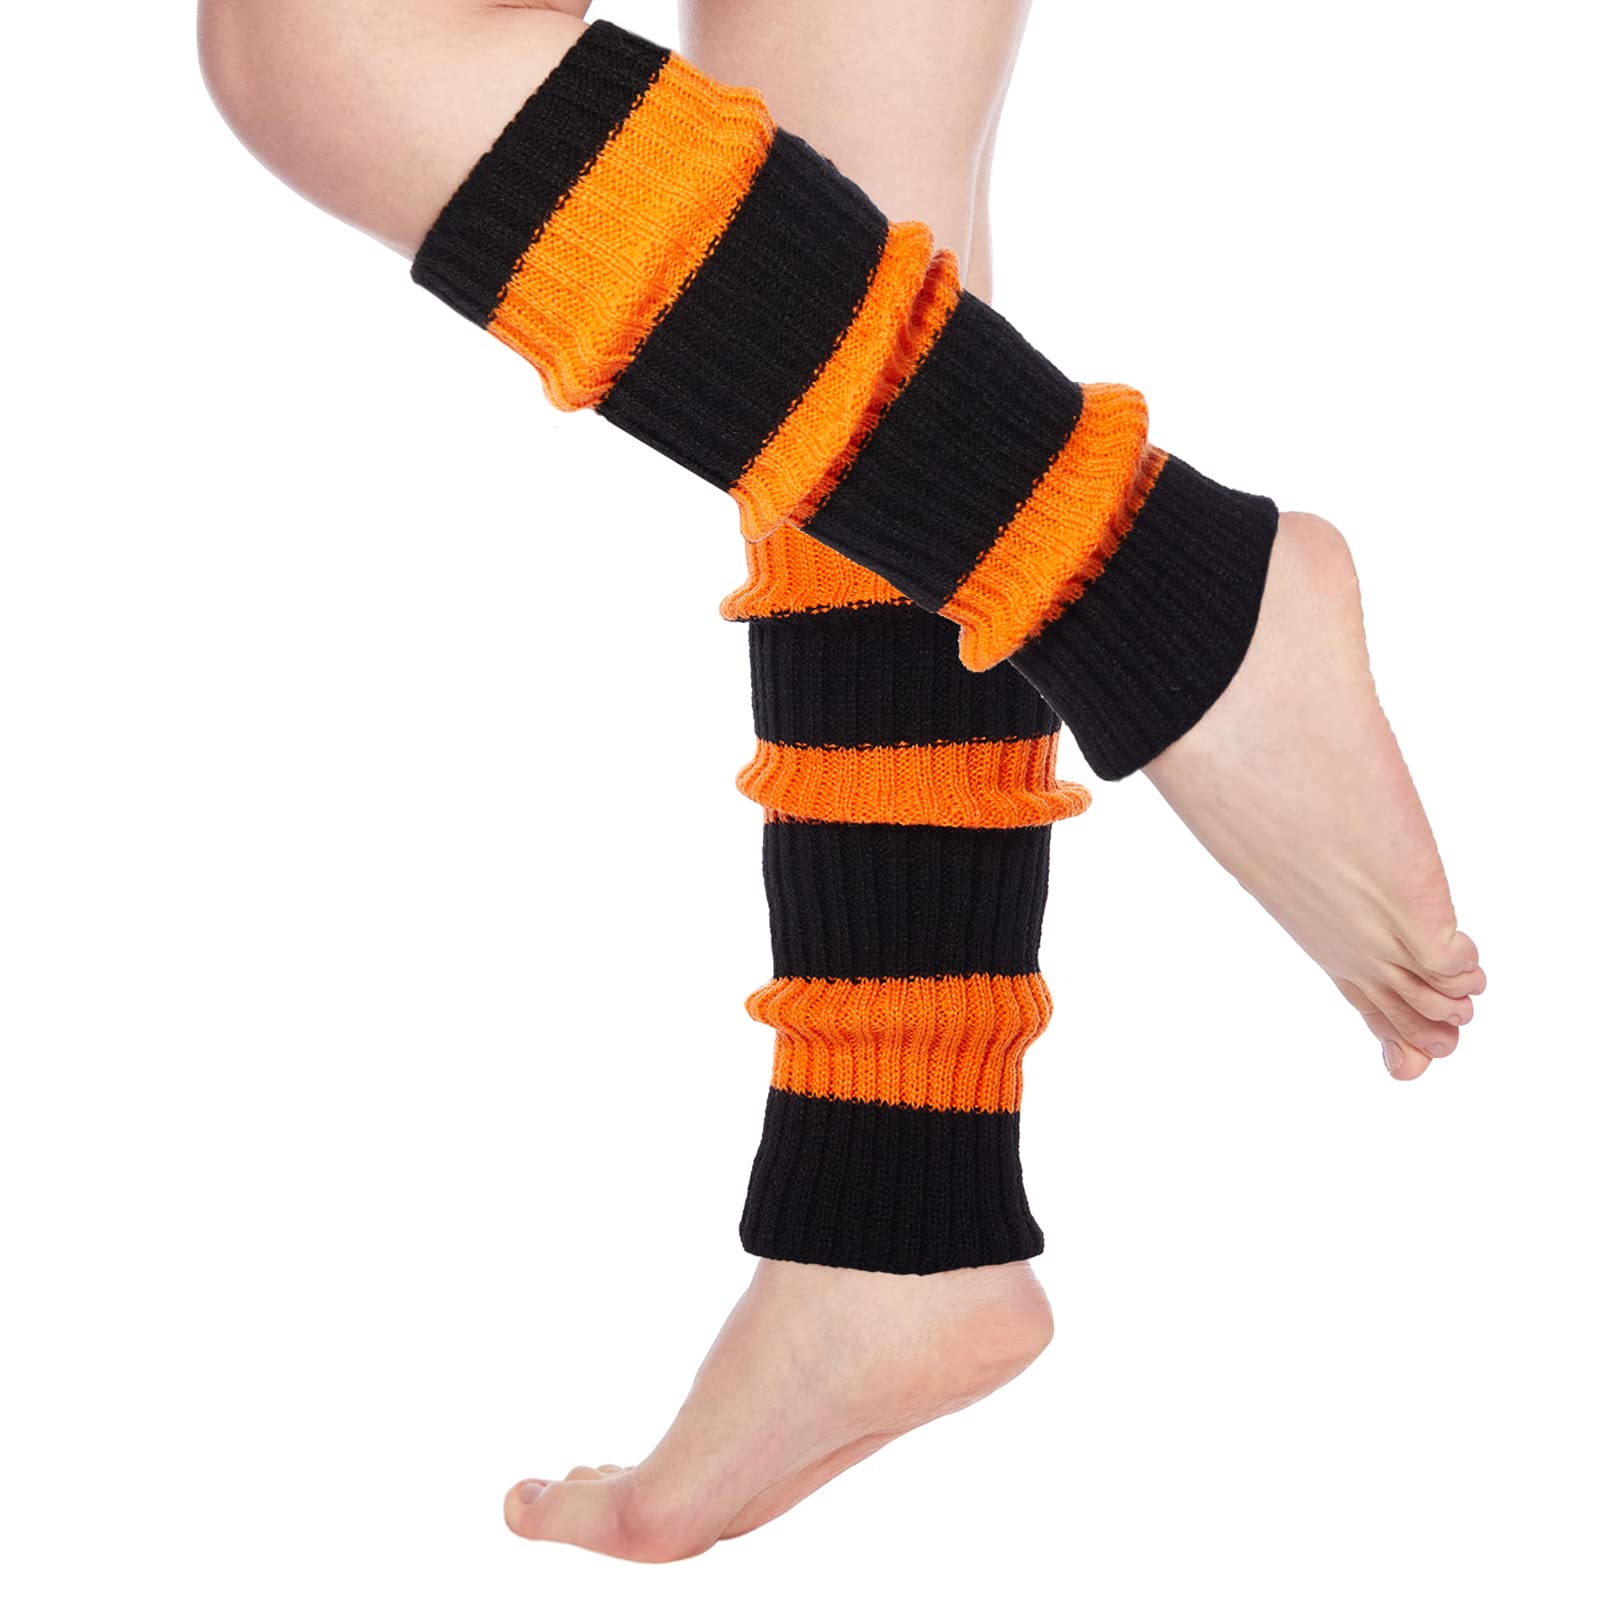 Womens Leg Warmers Neon Knitted for 80s Party Sports Yoga-Halloween black & Pumpkin - Moon Wood